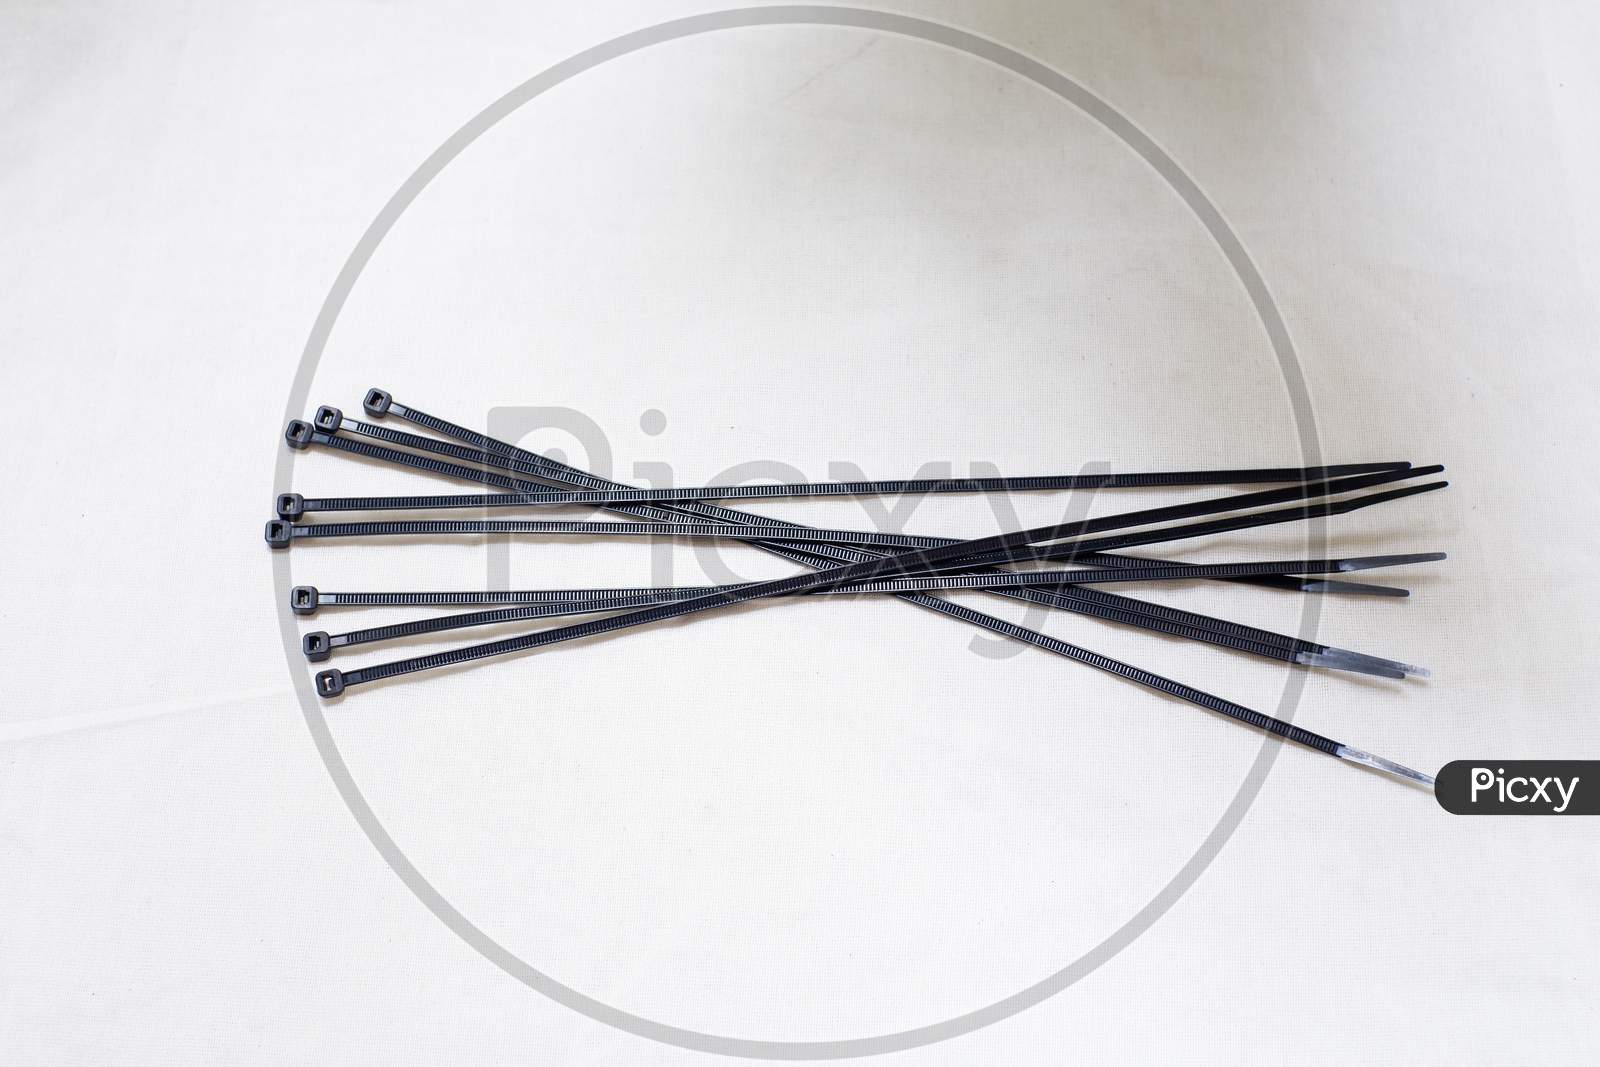 Cable Ties With A Black Color In A White Background